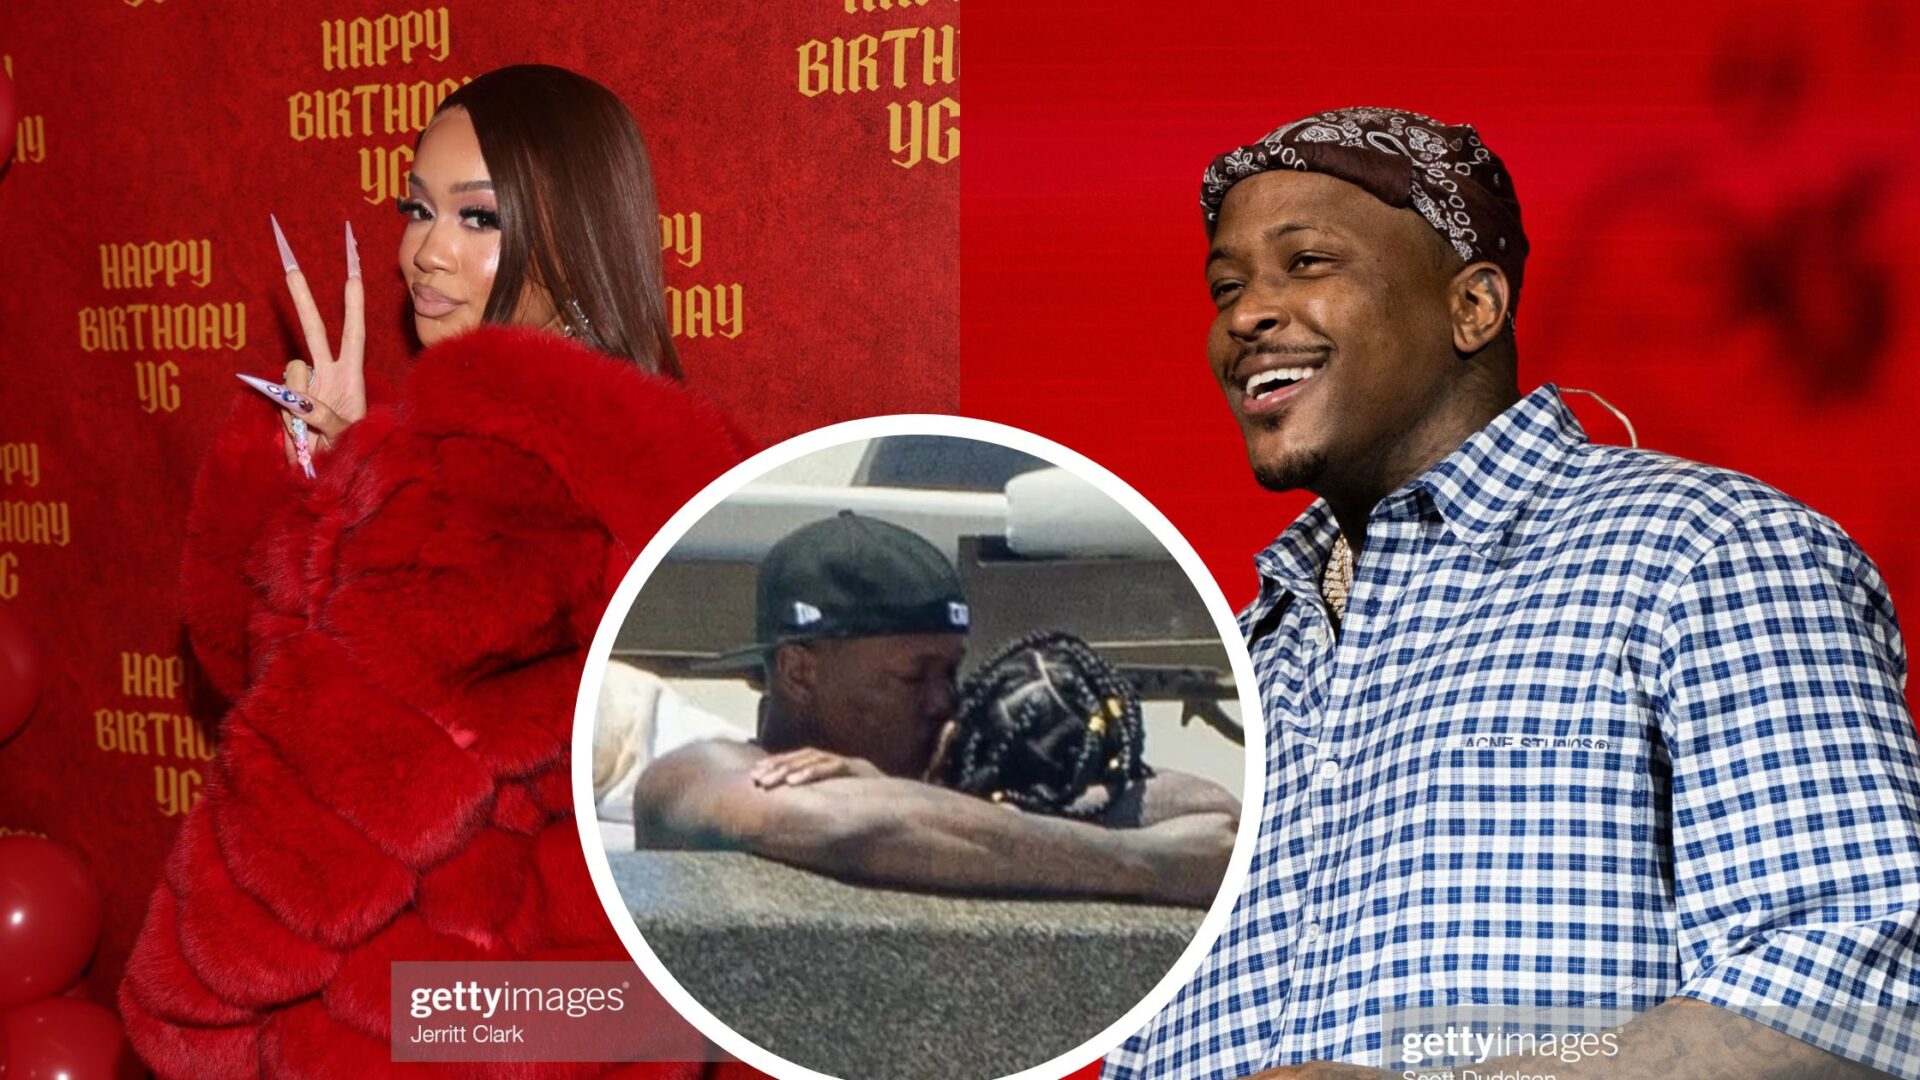 Saweetie and yg